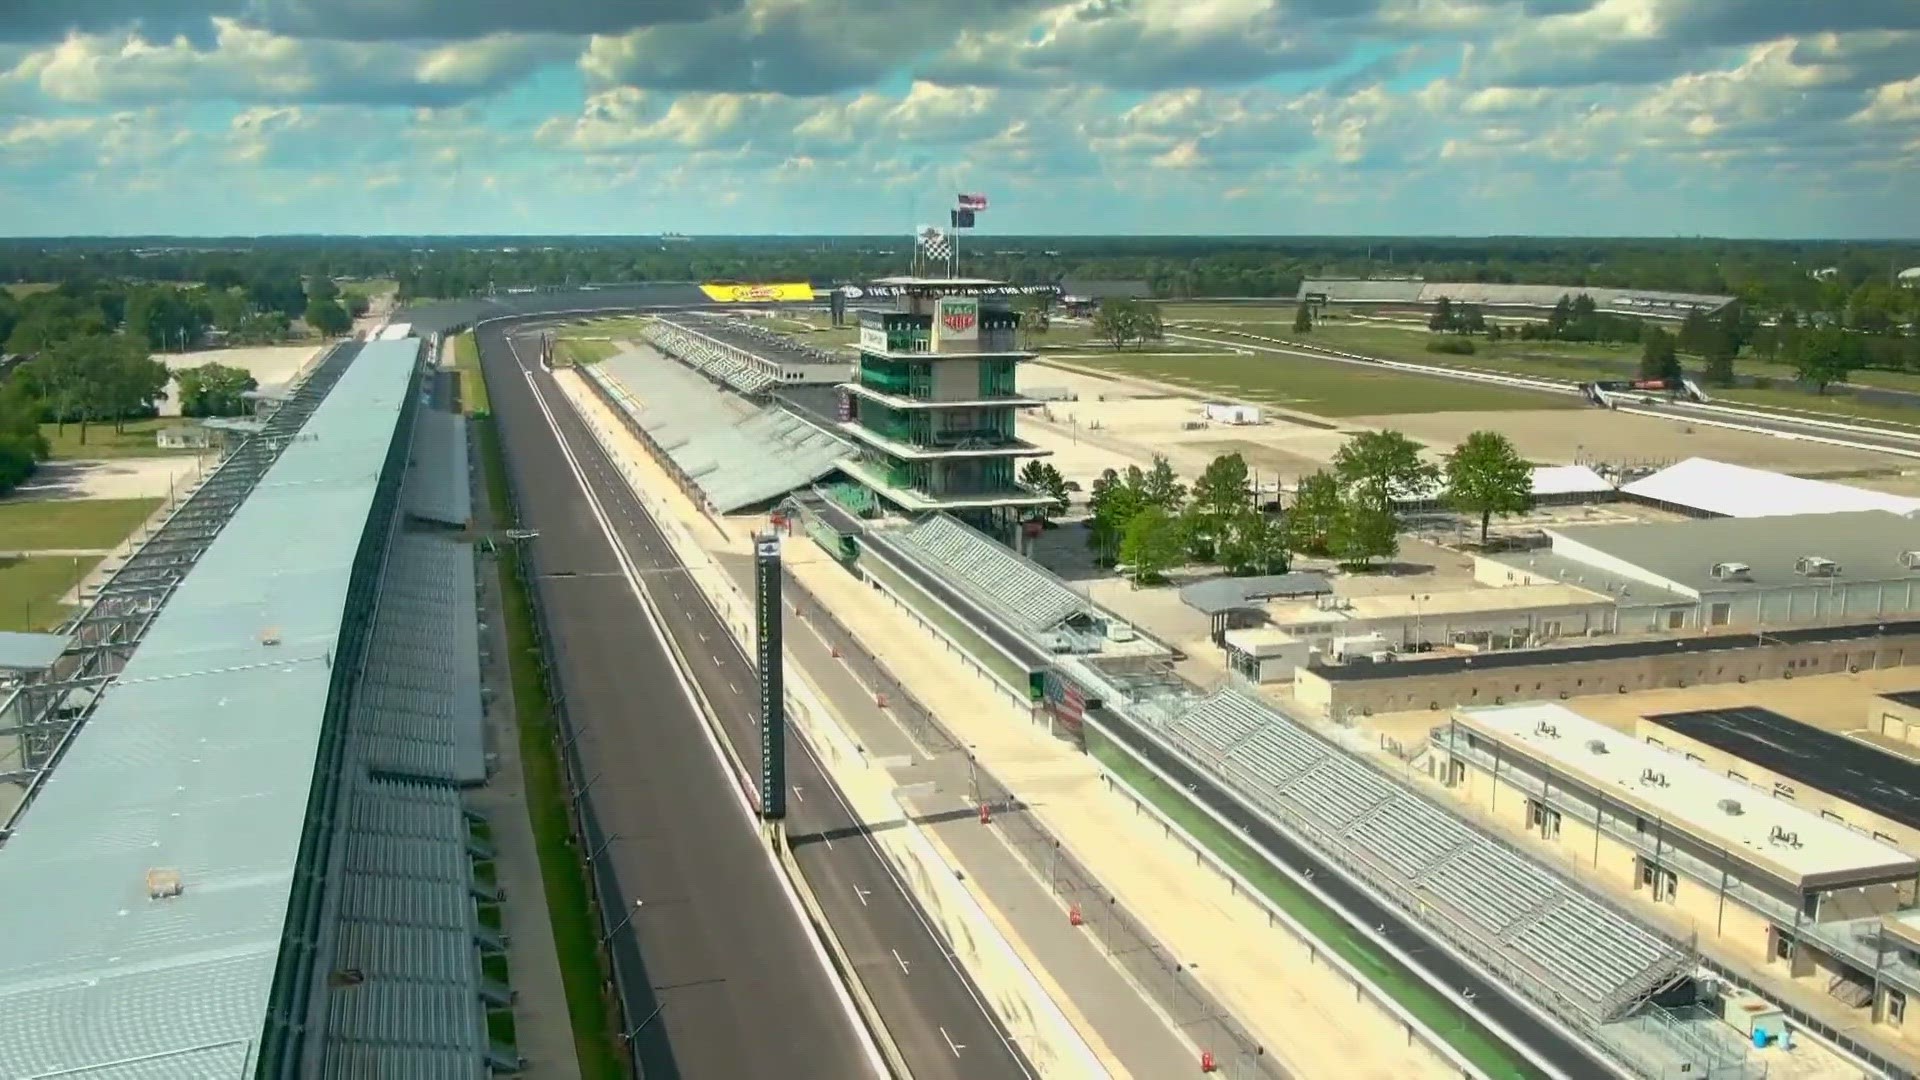 Low flying helicopters will be visible at the Indianapolis Motor Speedway as a part of public safety measures.